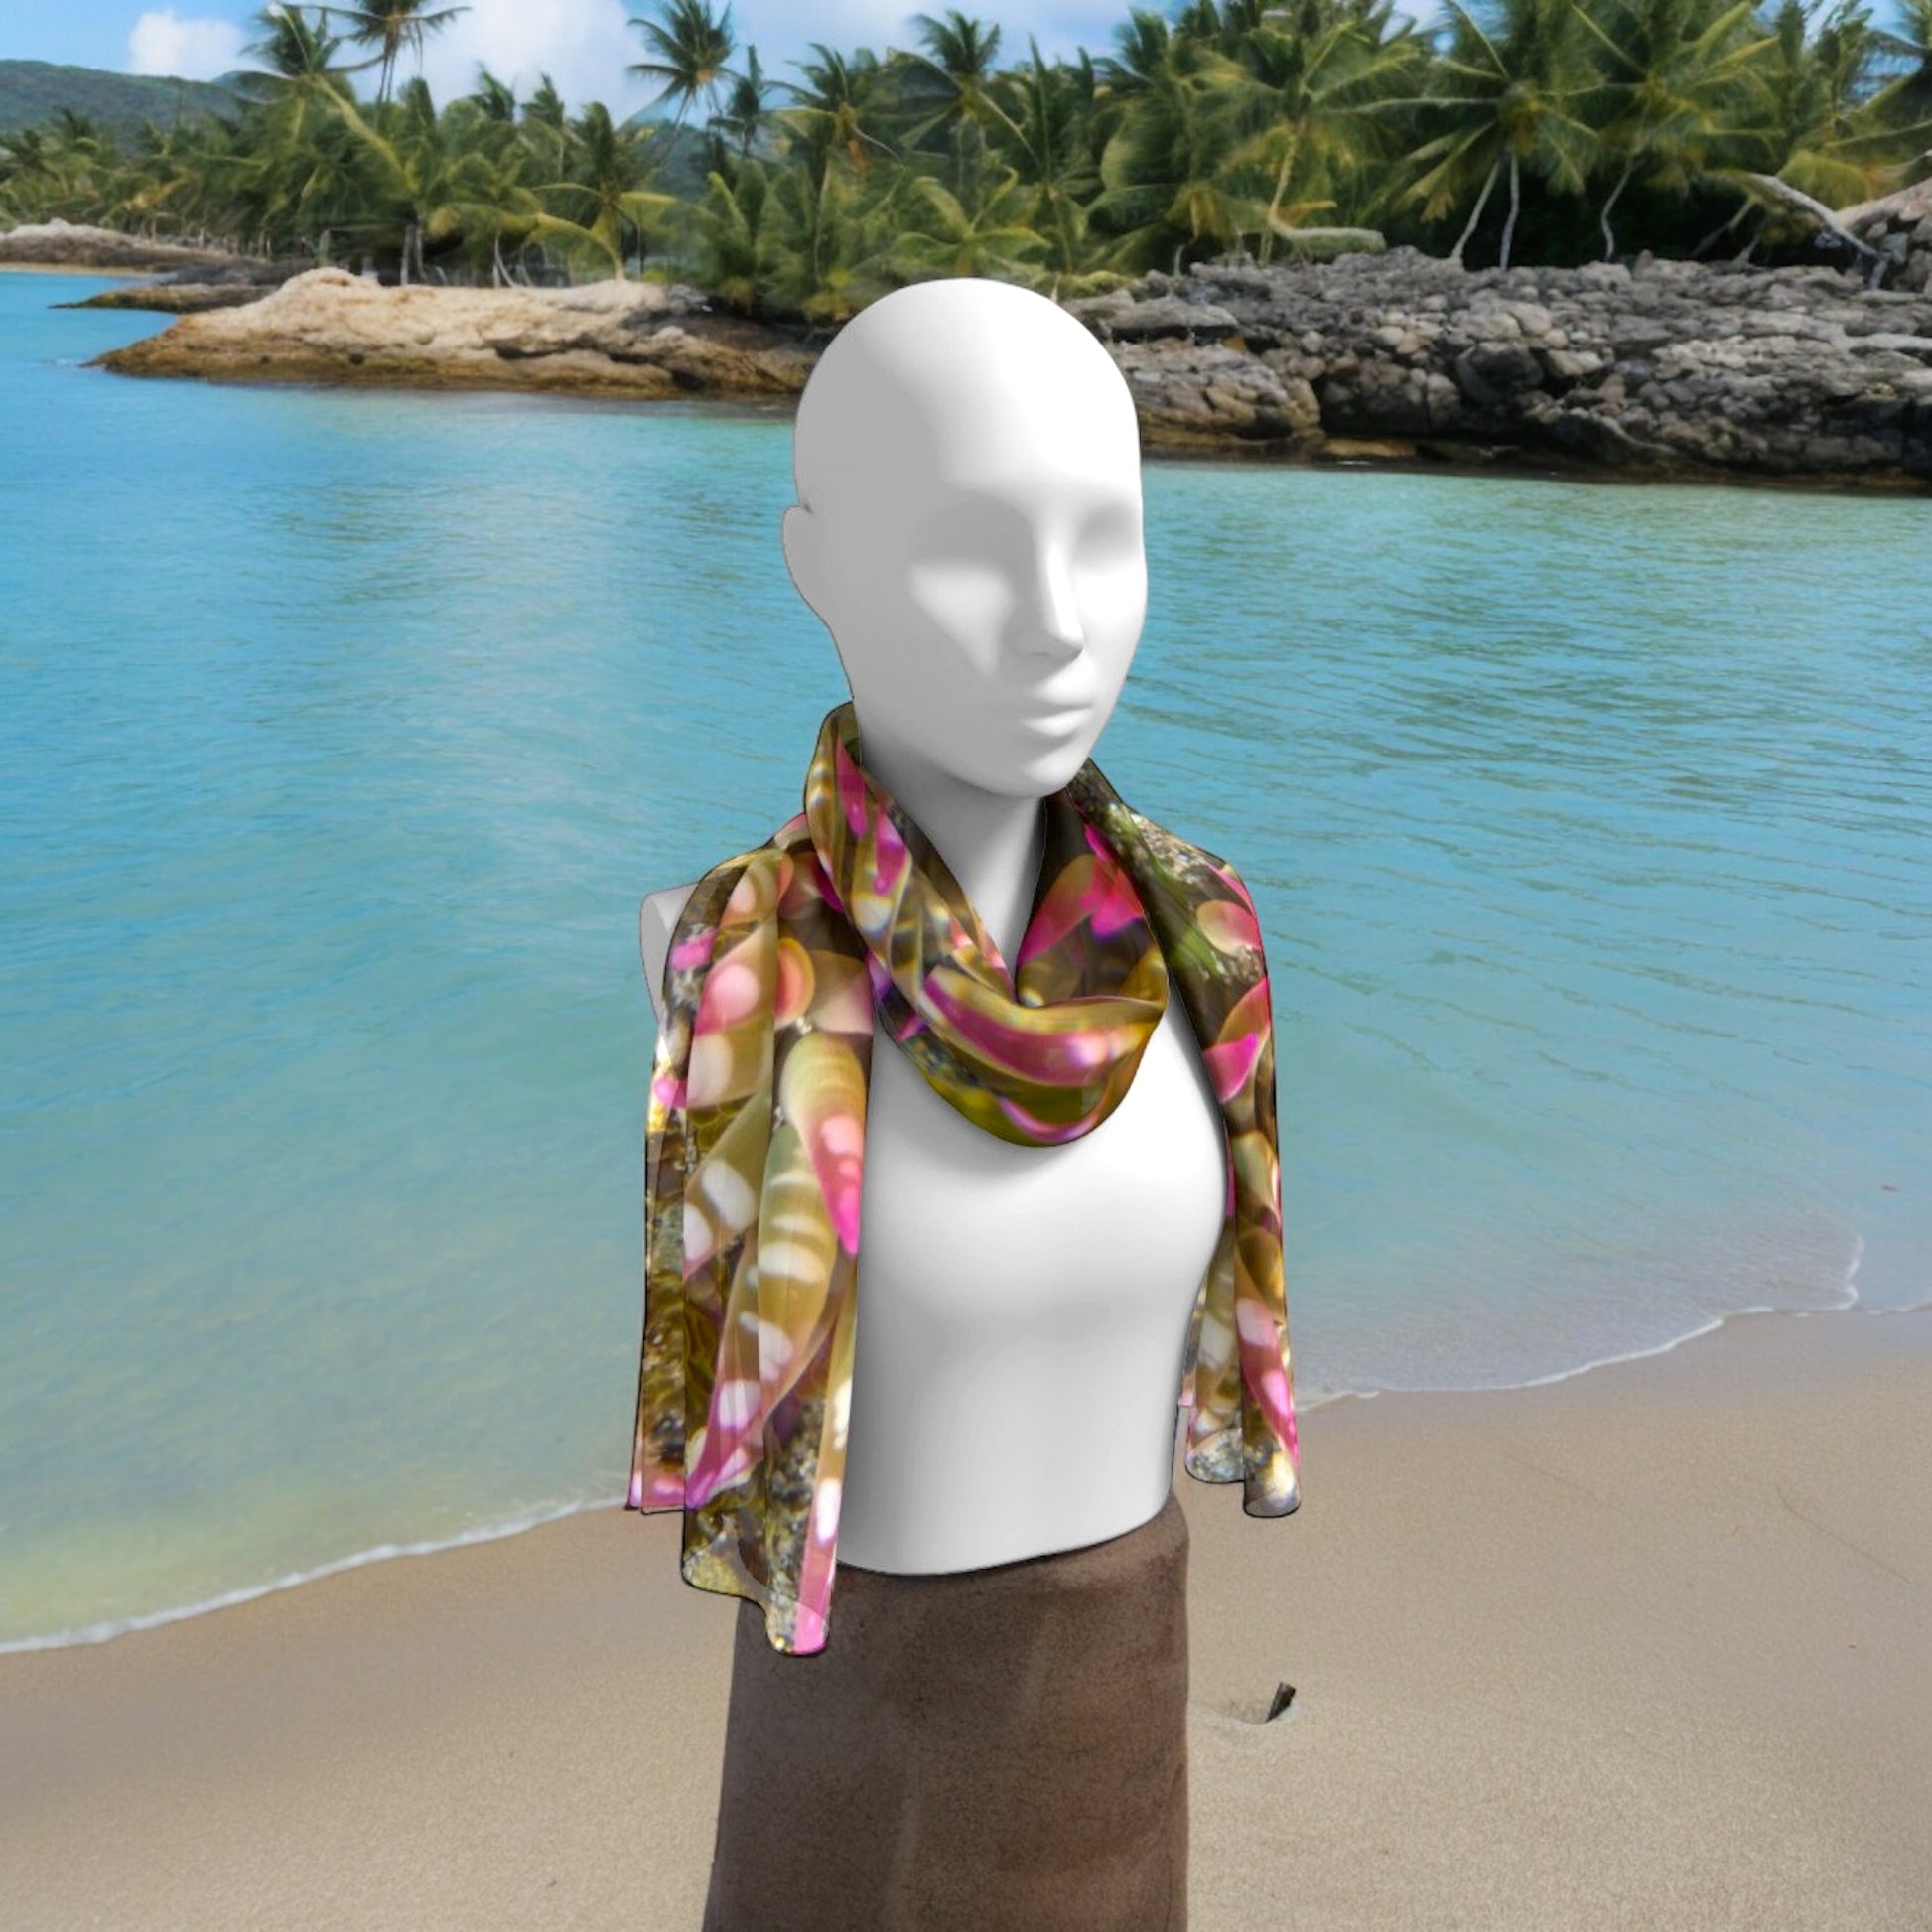 Pink Sea Anemone printed on a long scarf worn around the neck on a person at the beach.